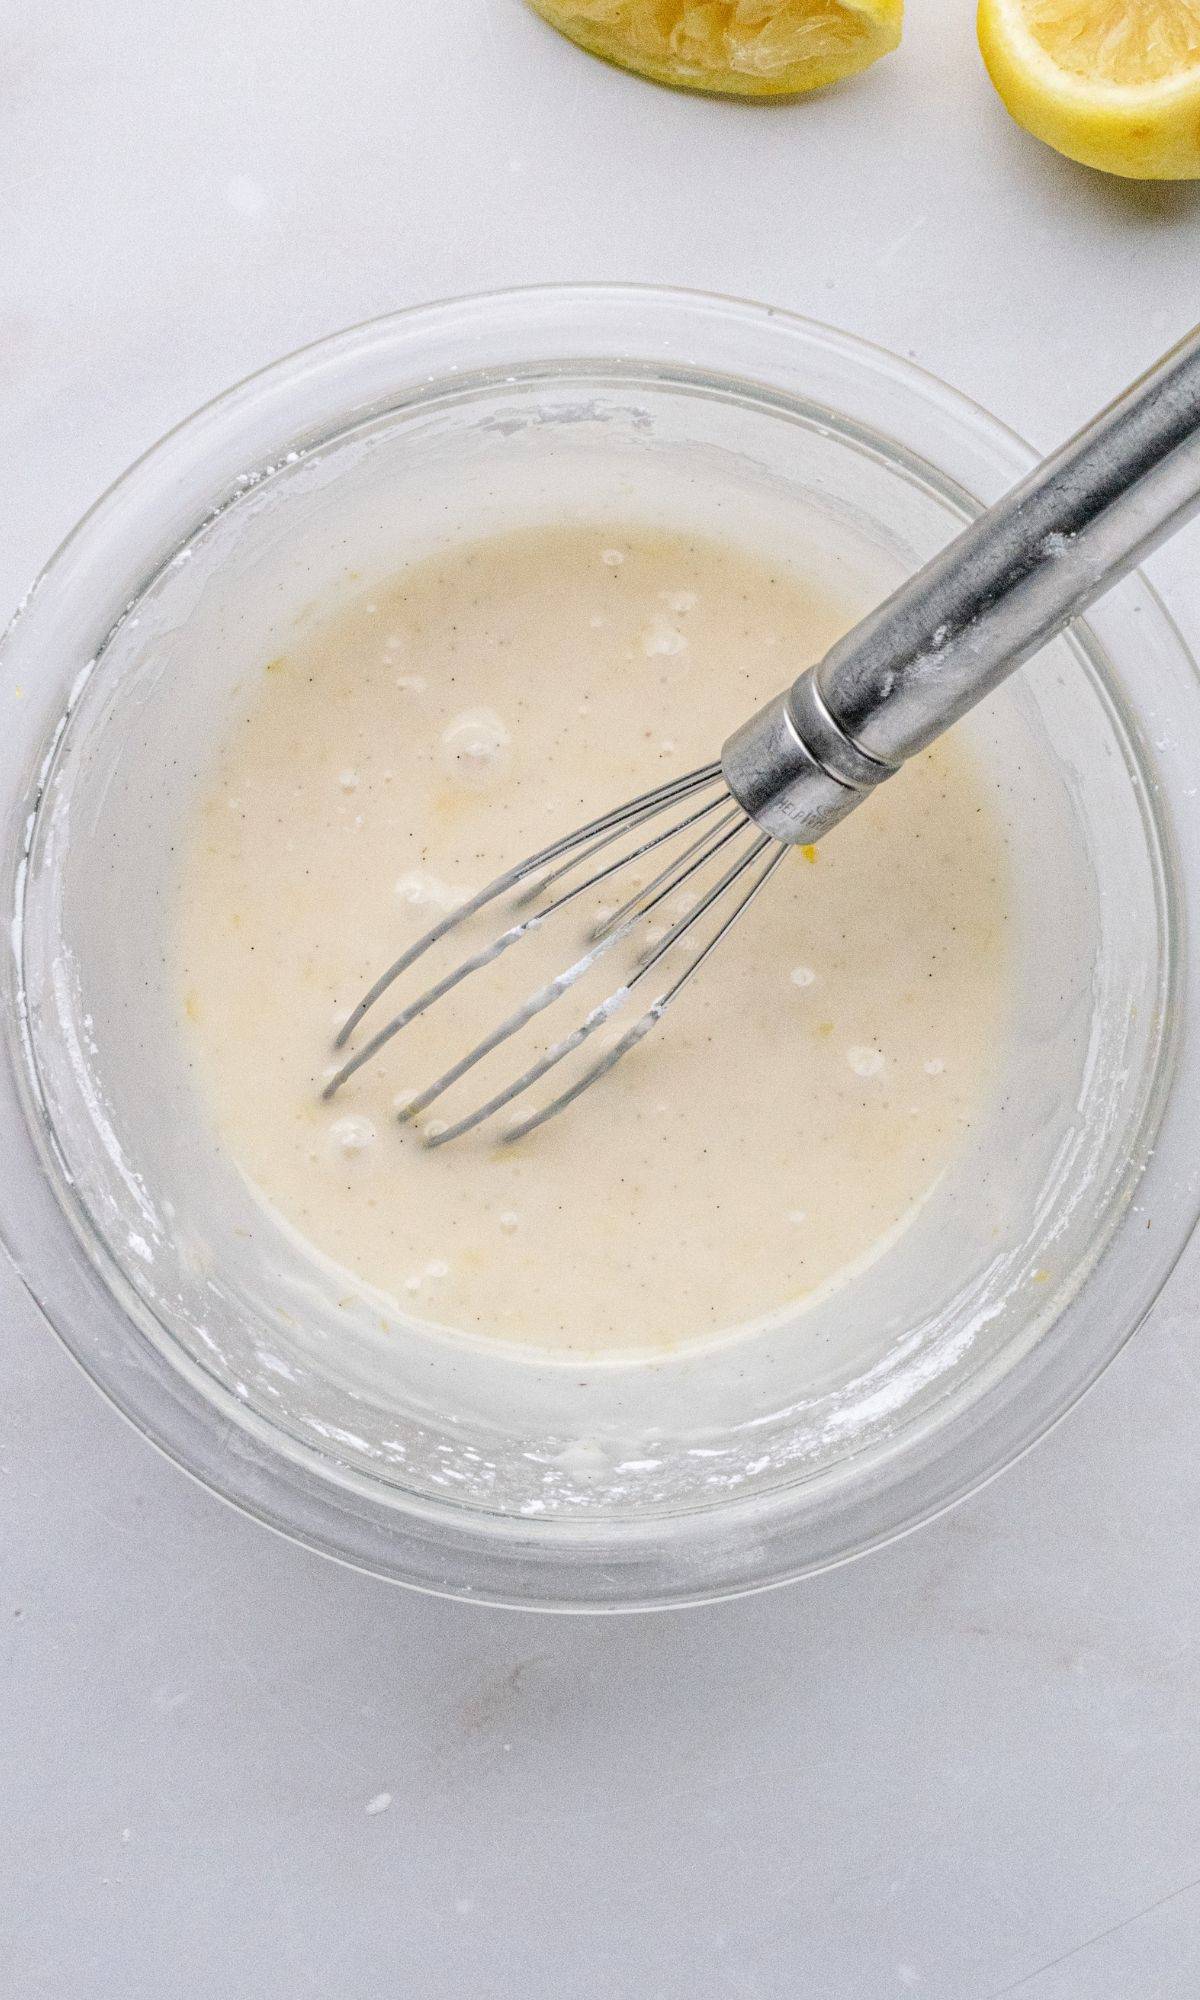 Lemon zest glaze in a bowl with a whisk.